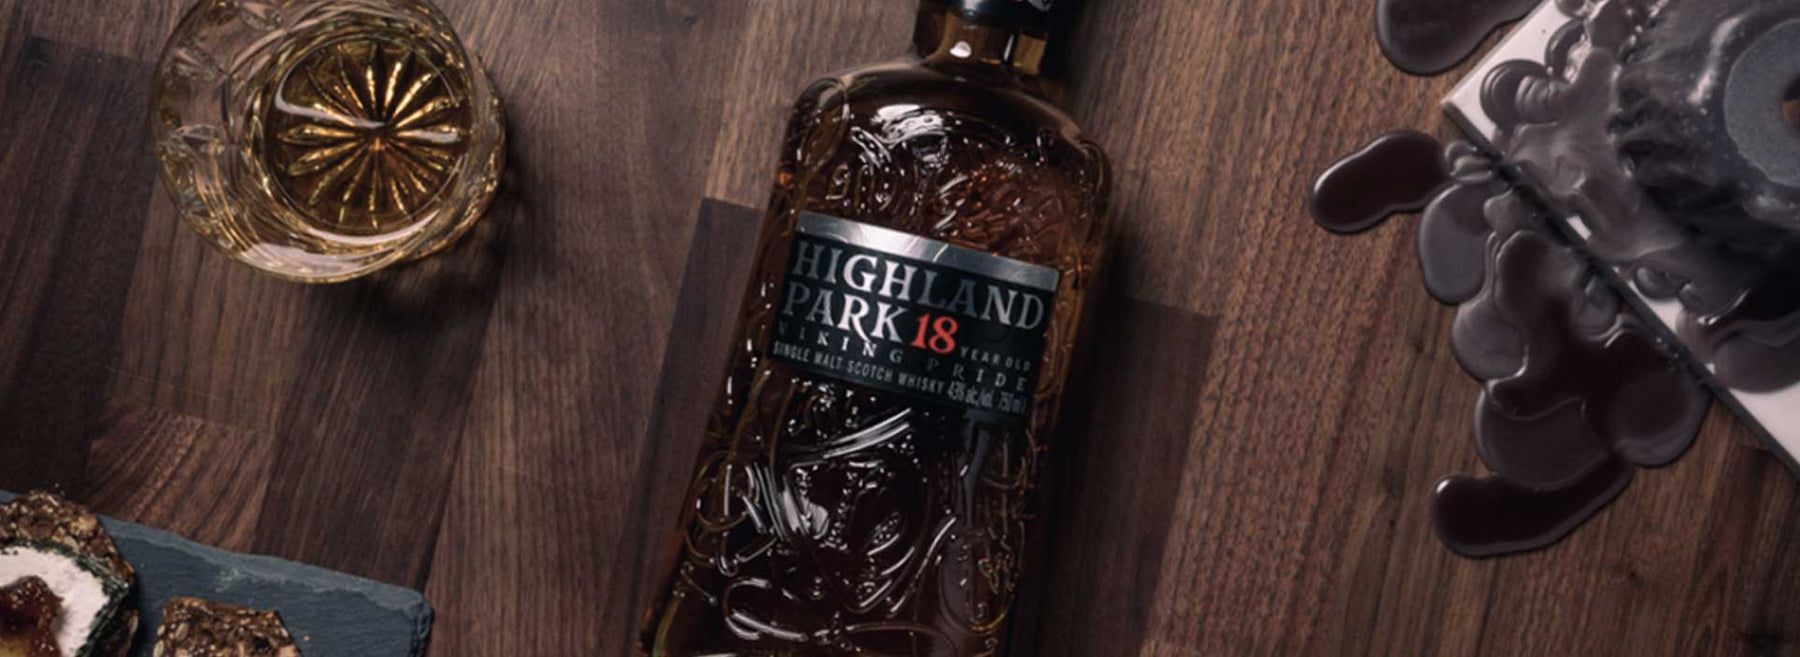 Rob Roy Or Highland Park Whisky 18 Year Old Cocktail